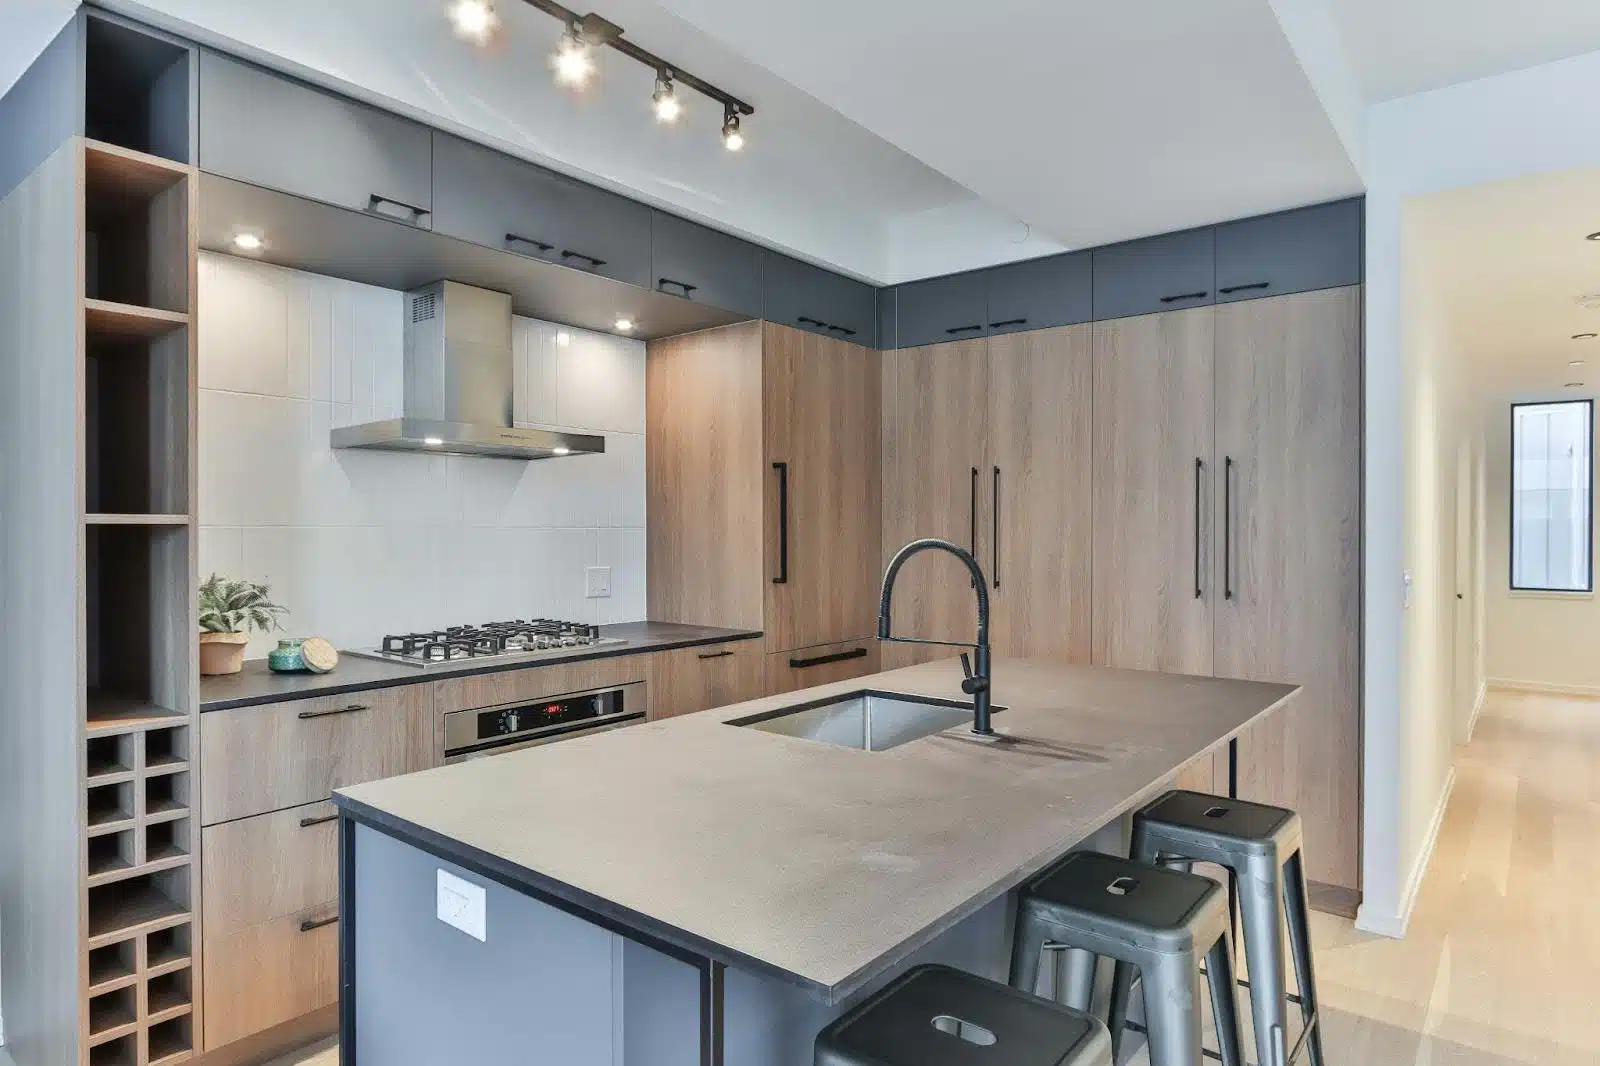 A sleek, modern kitchen with wood cabinets, an island with a built-in sink, gas stovetop, and under-cabinet lights.